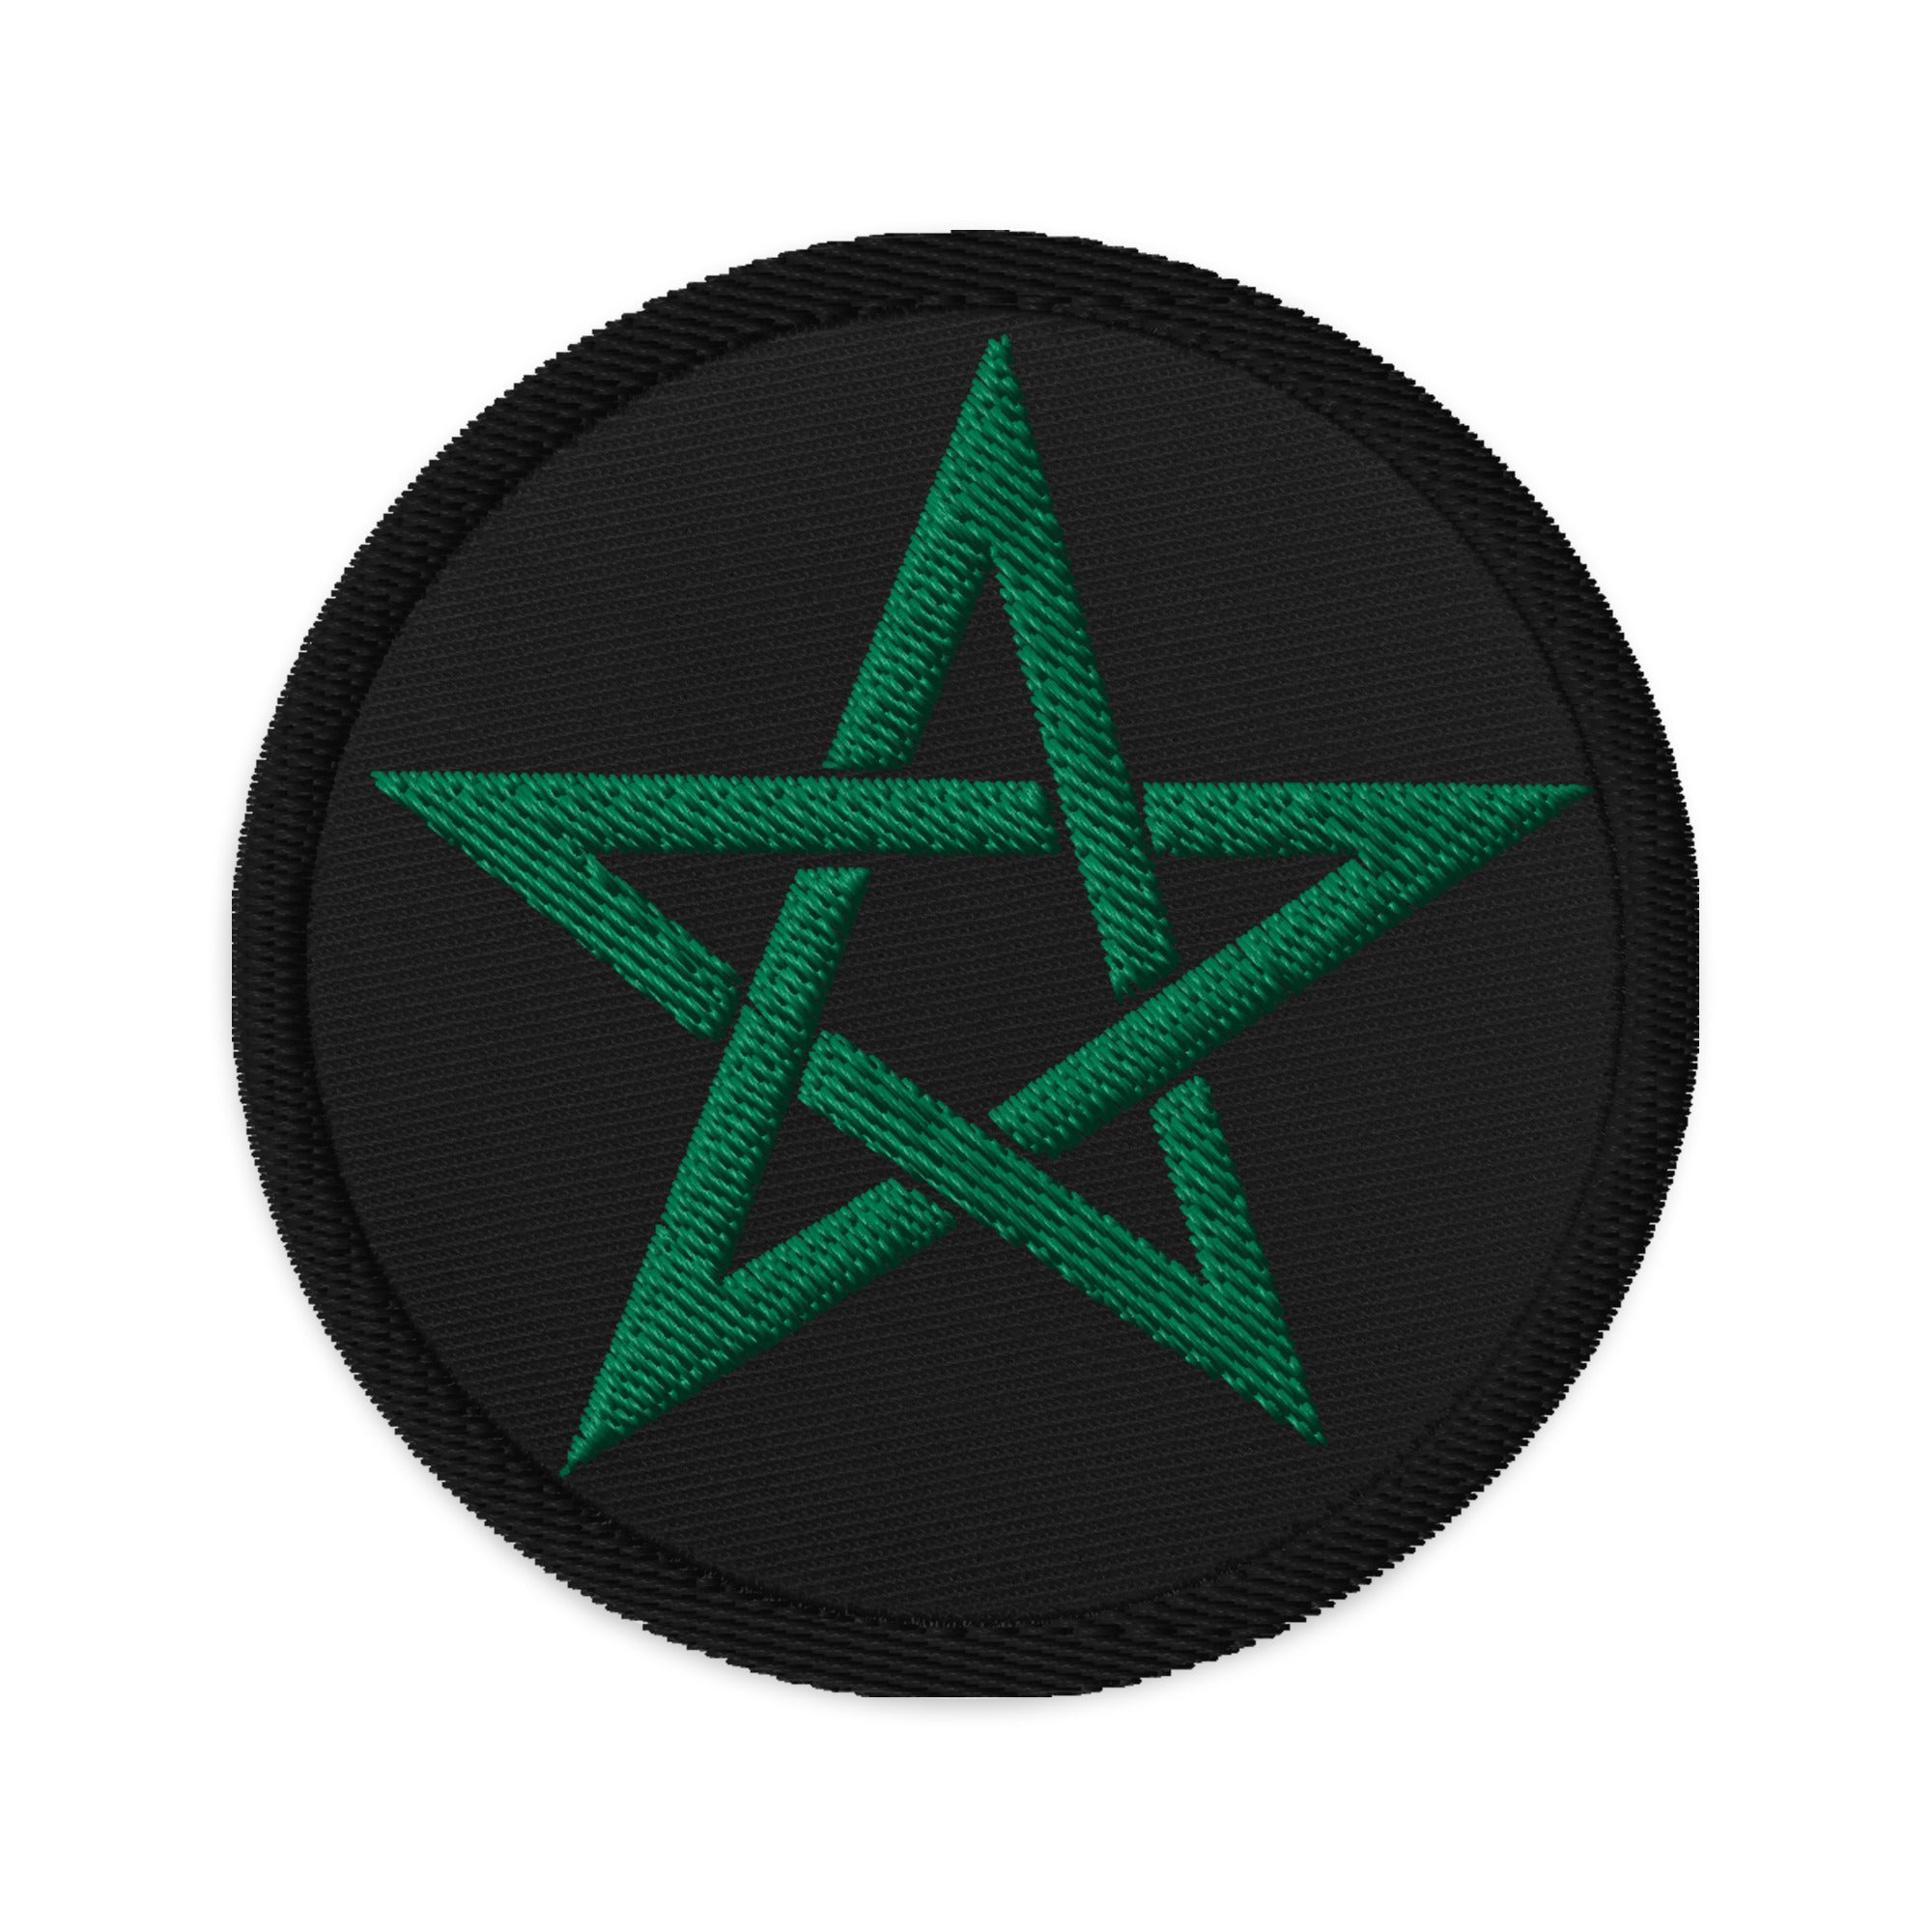 Wiccan Woven Pentagram Symbol Embroidered Patch 5 Point Star - Edge of Life Designs